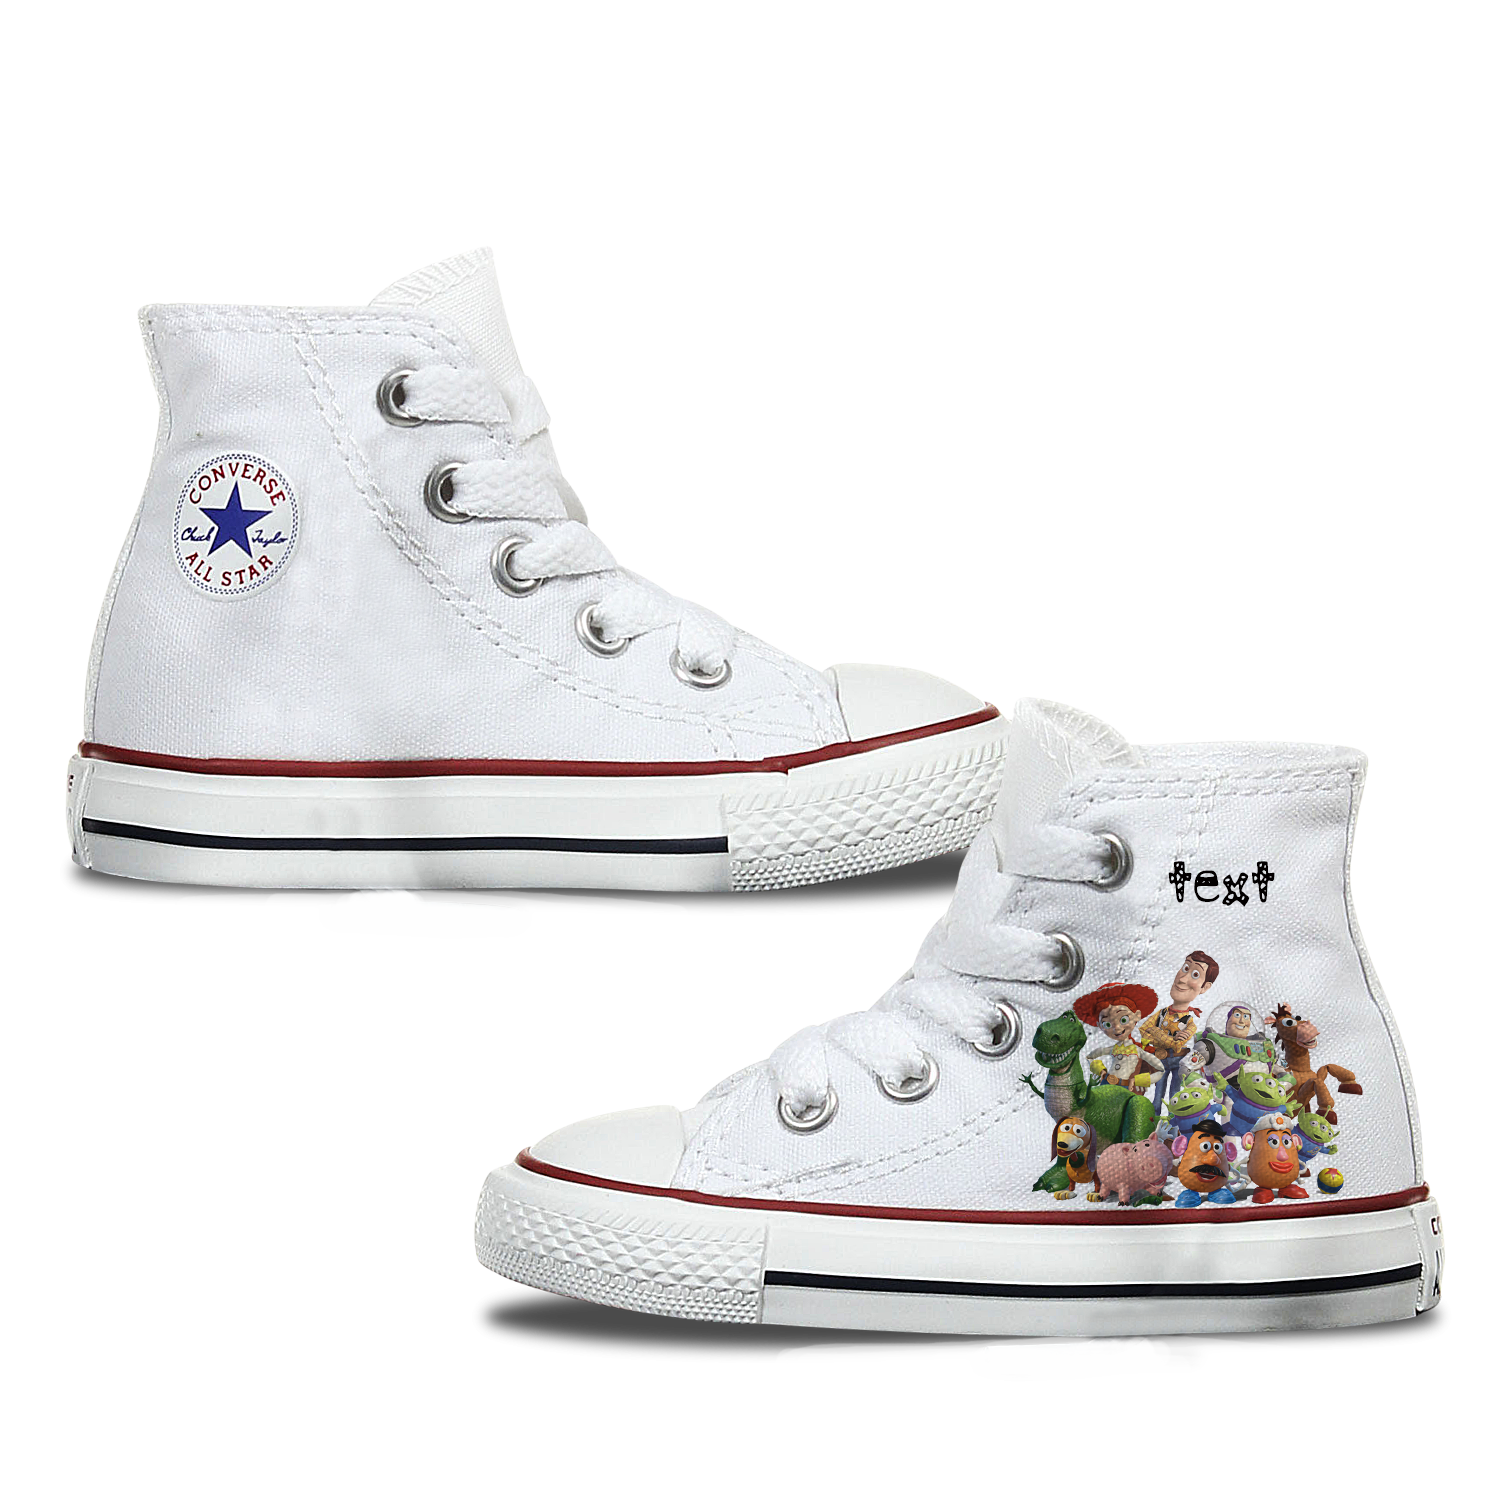 converse toy story shoes